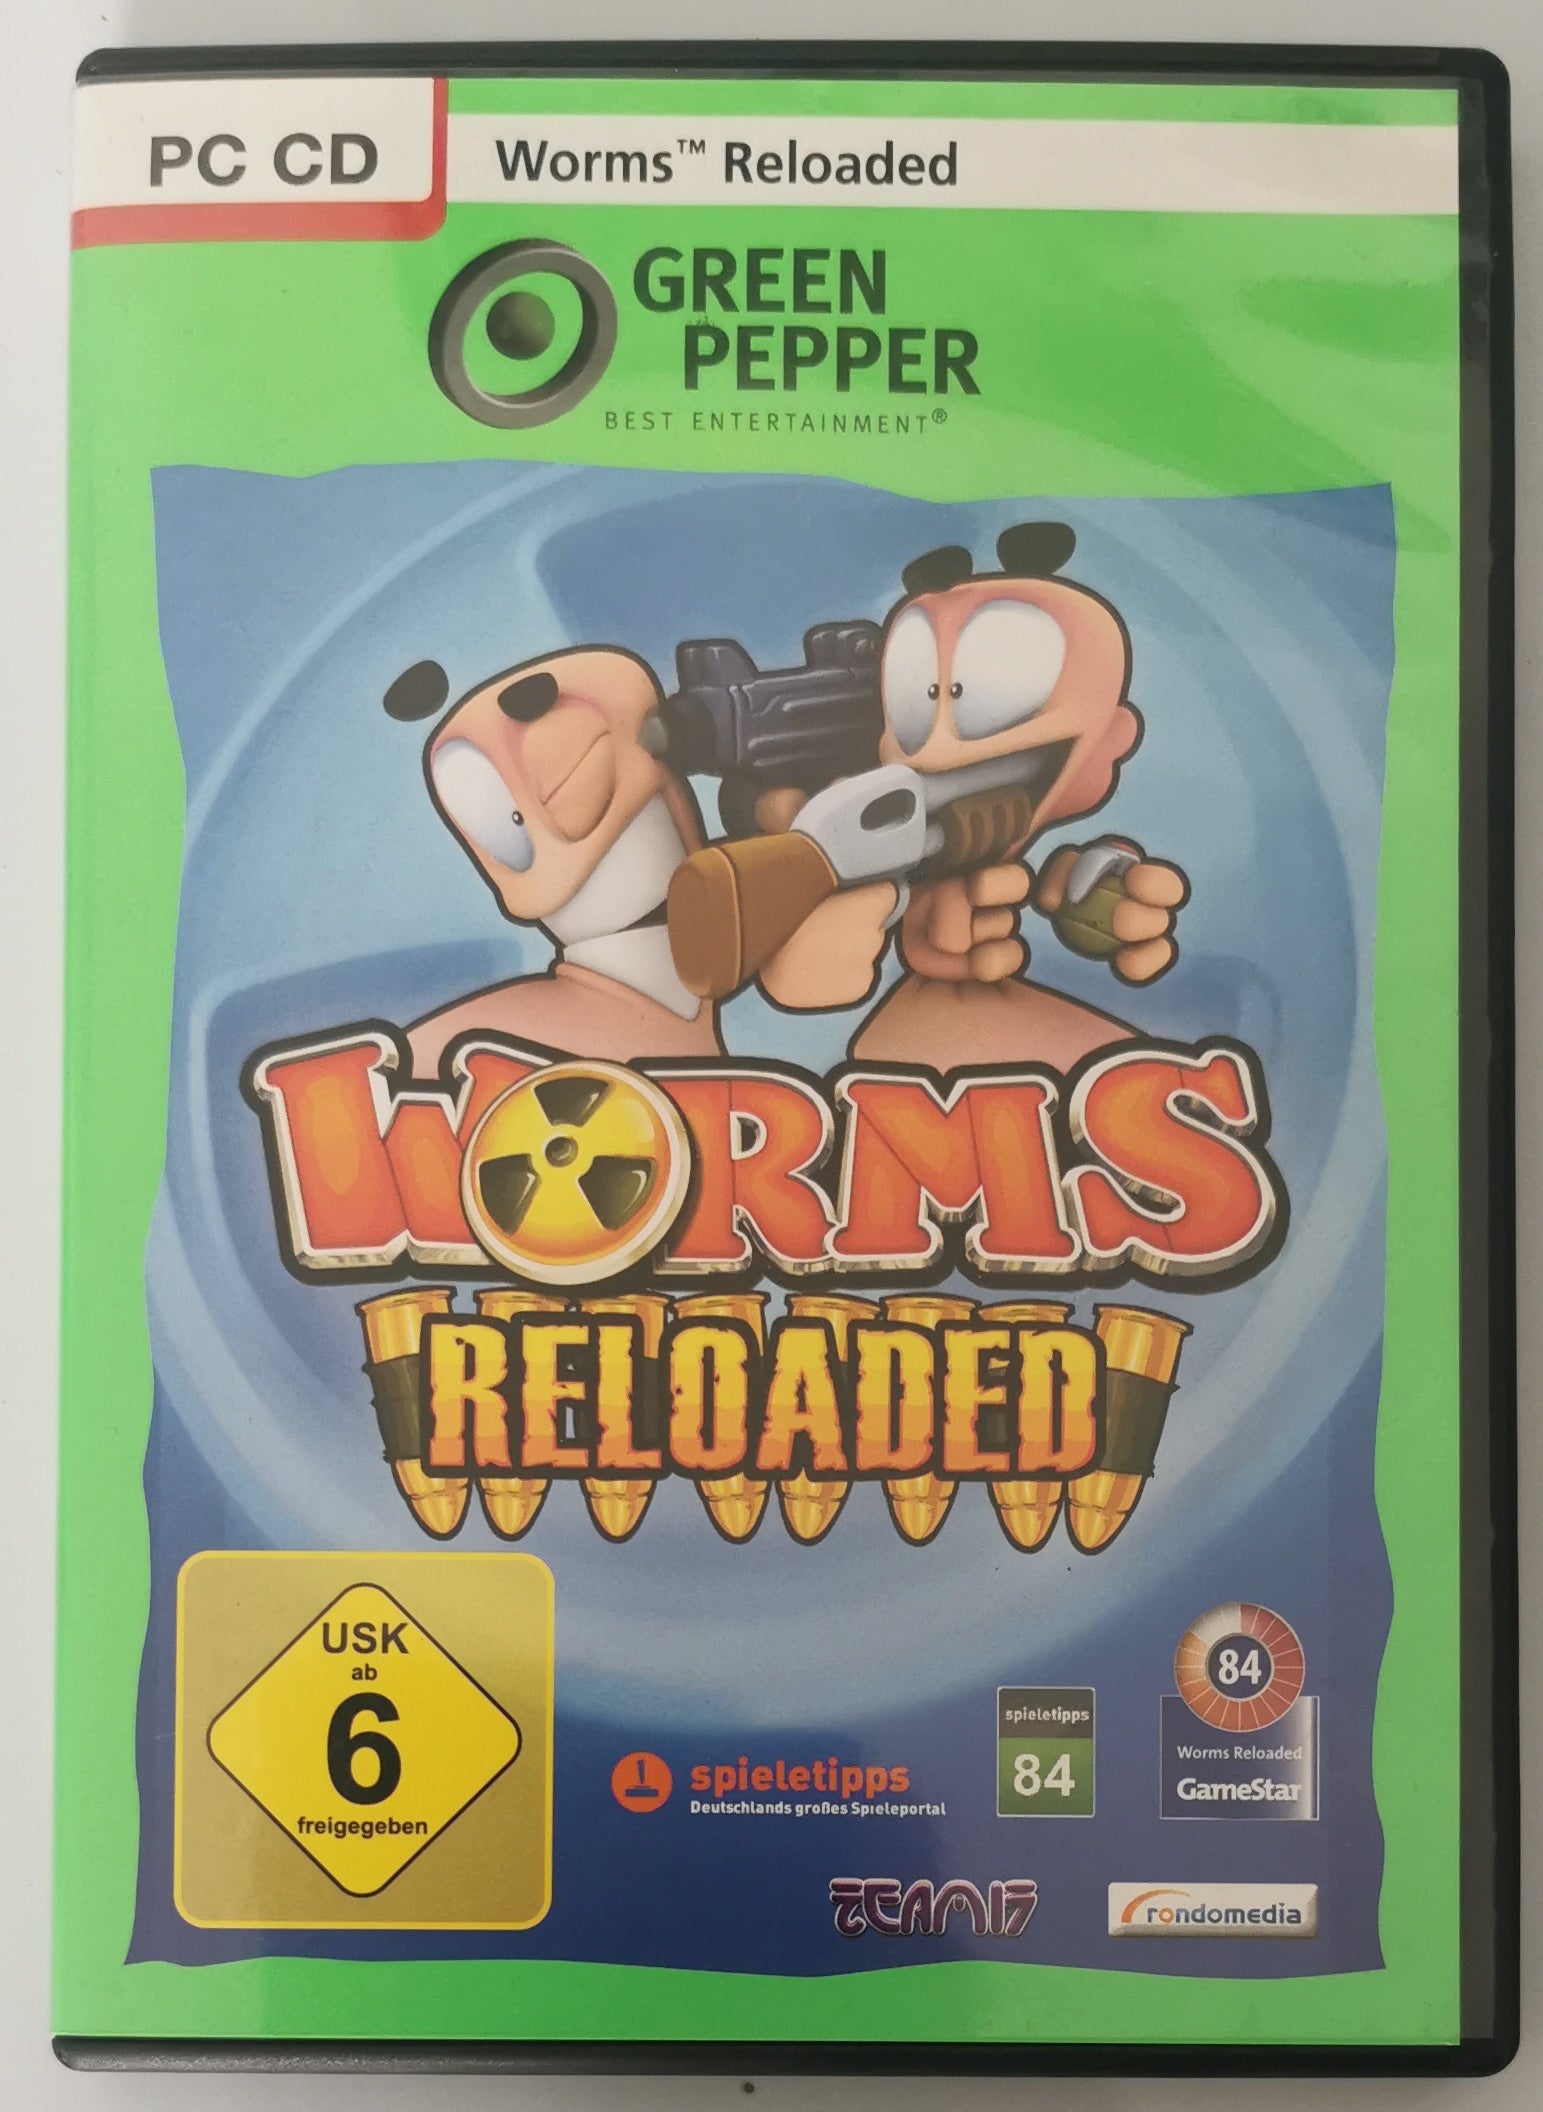 Worms Reloaded Software Pyramide PC (Windows) [Gut]